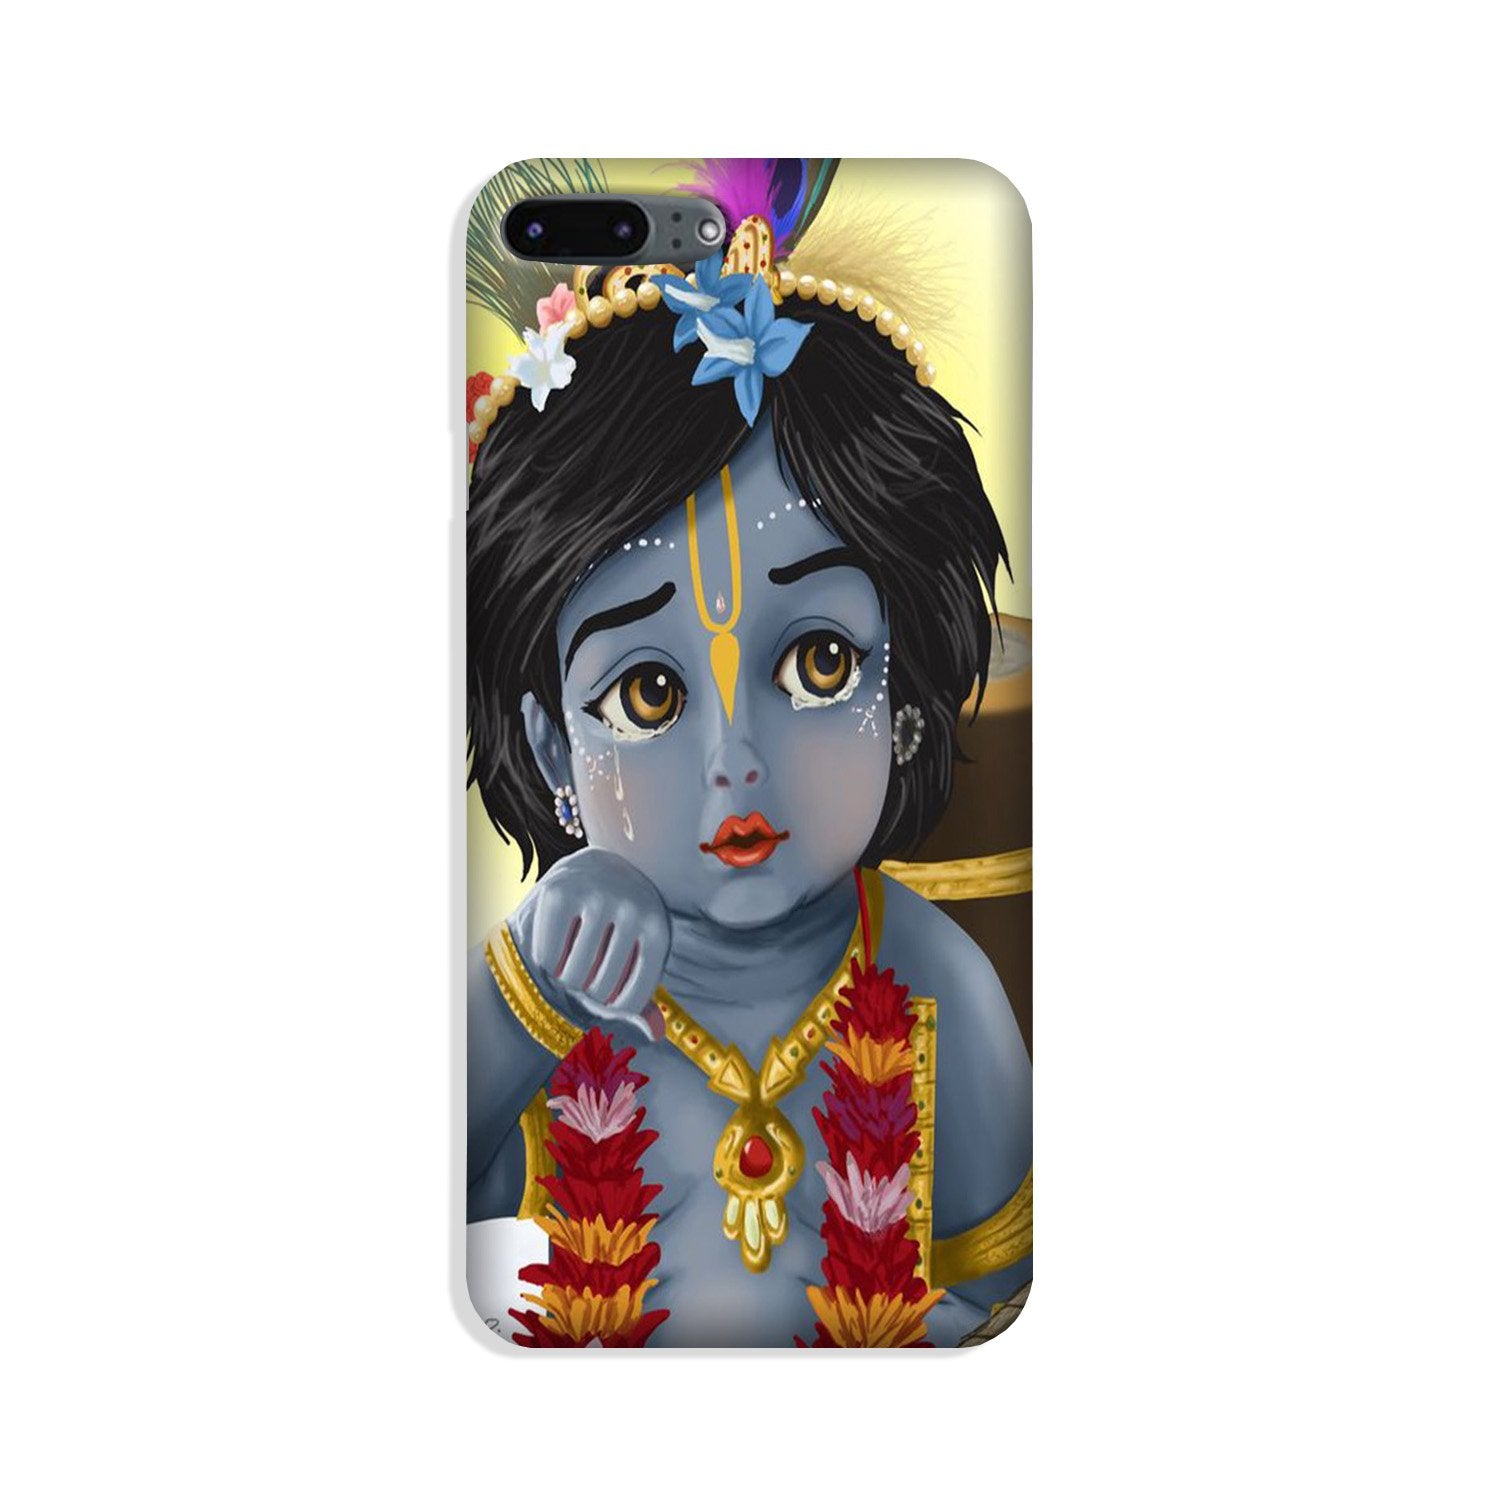 Bal Gopal Case for iPhone 8 Plus